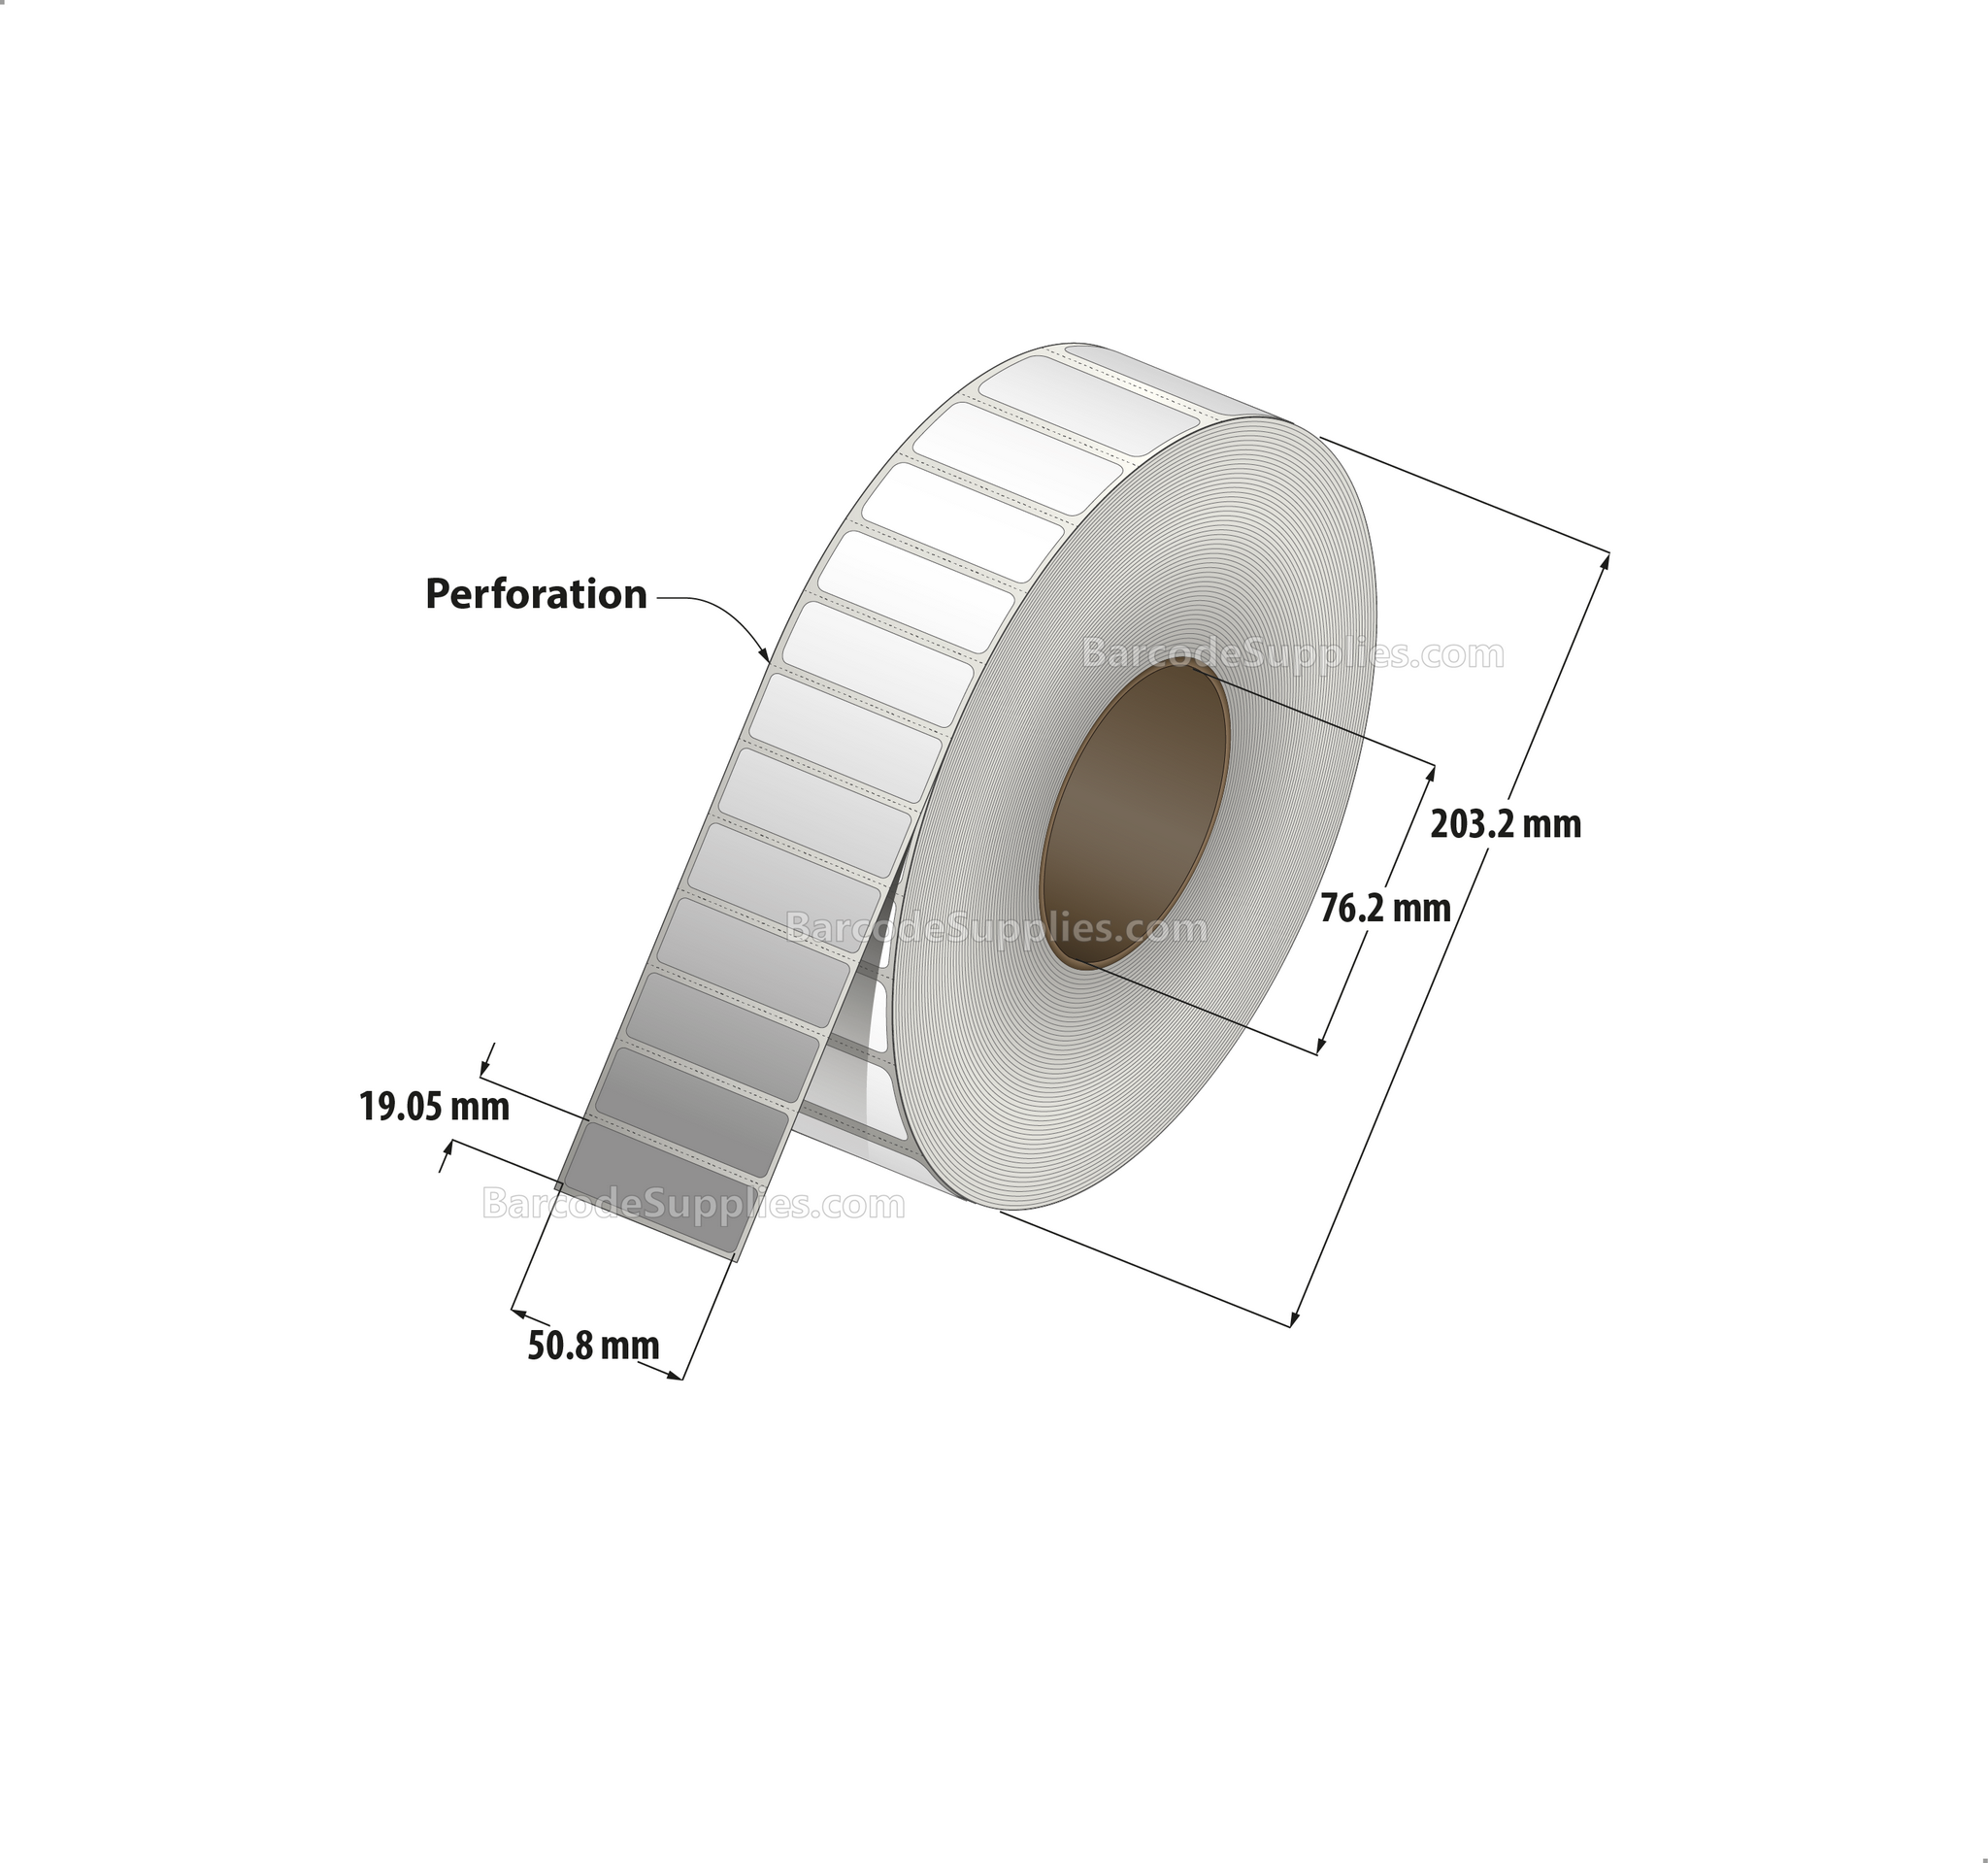 2 x 0.75 Thermal Transfer White Labels With Permanent Adhesive - Perforated - 7500 Labels Per Roll - Carton Of 8 Rolls - 60000 Labels Total - MPN: RT-2-075-7500-3